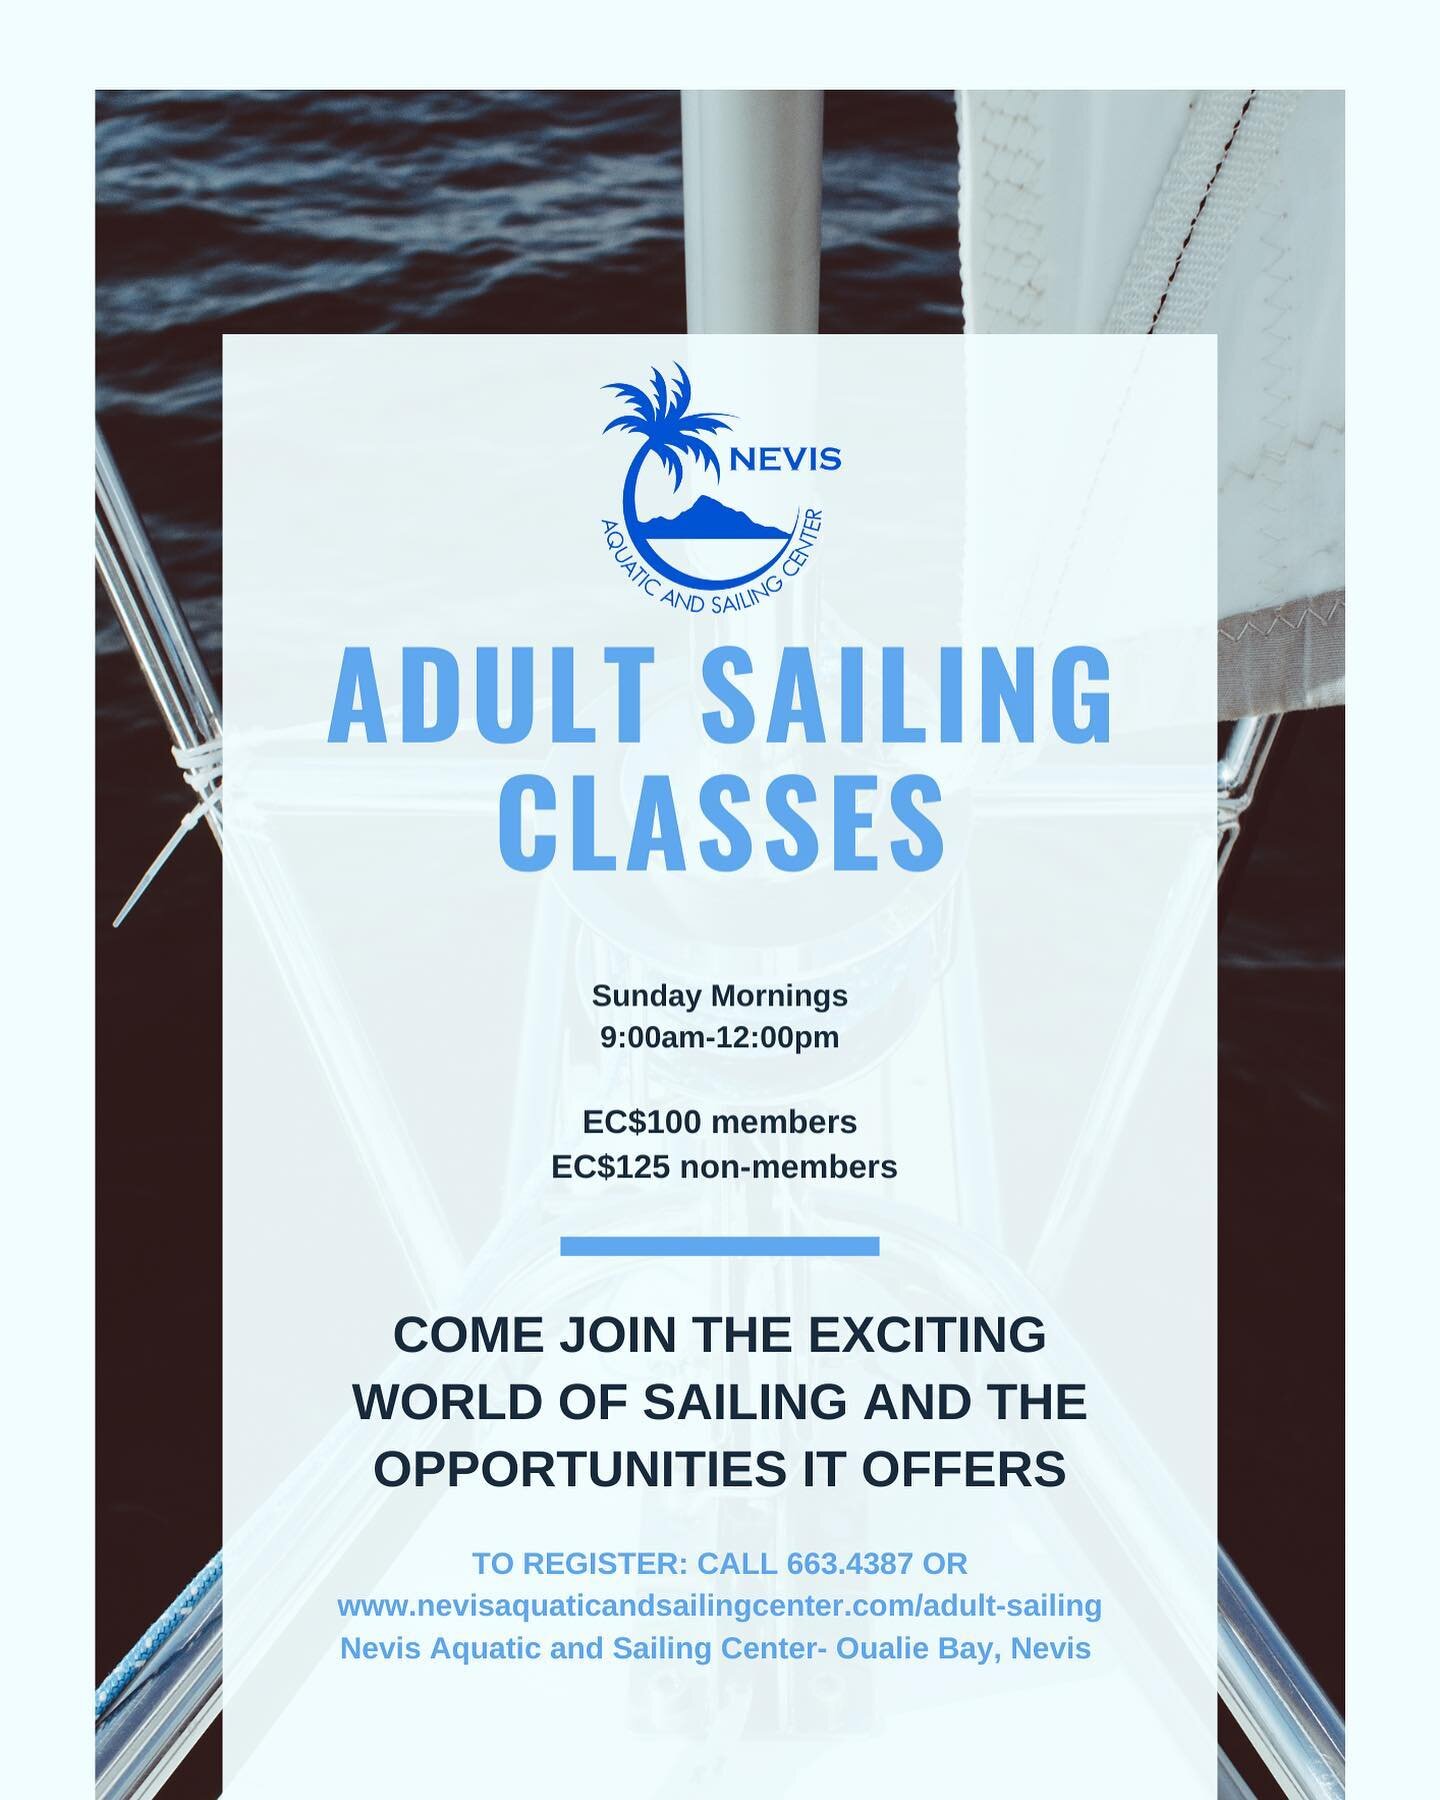 Adult Sail Sessions every Sunday morning. Join us!